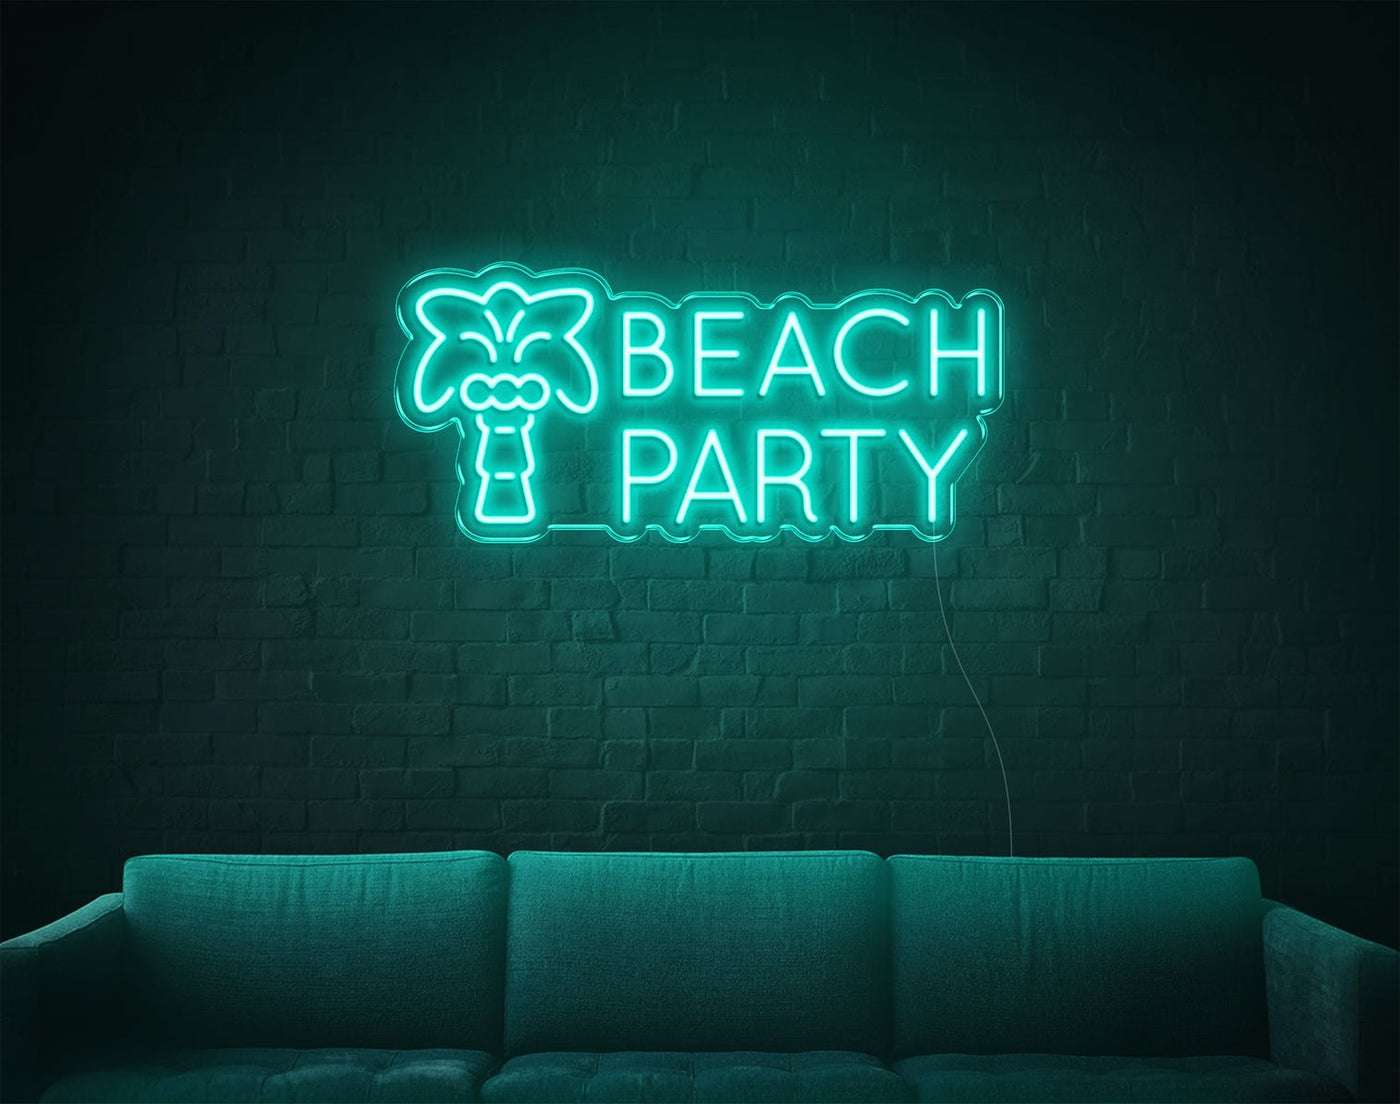 Beach Party LED Neon Sign - 12inch x 26inchHot Pink